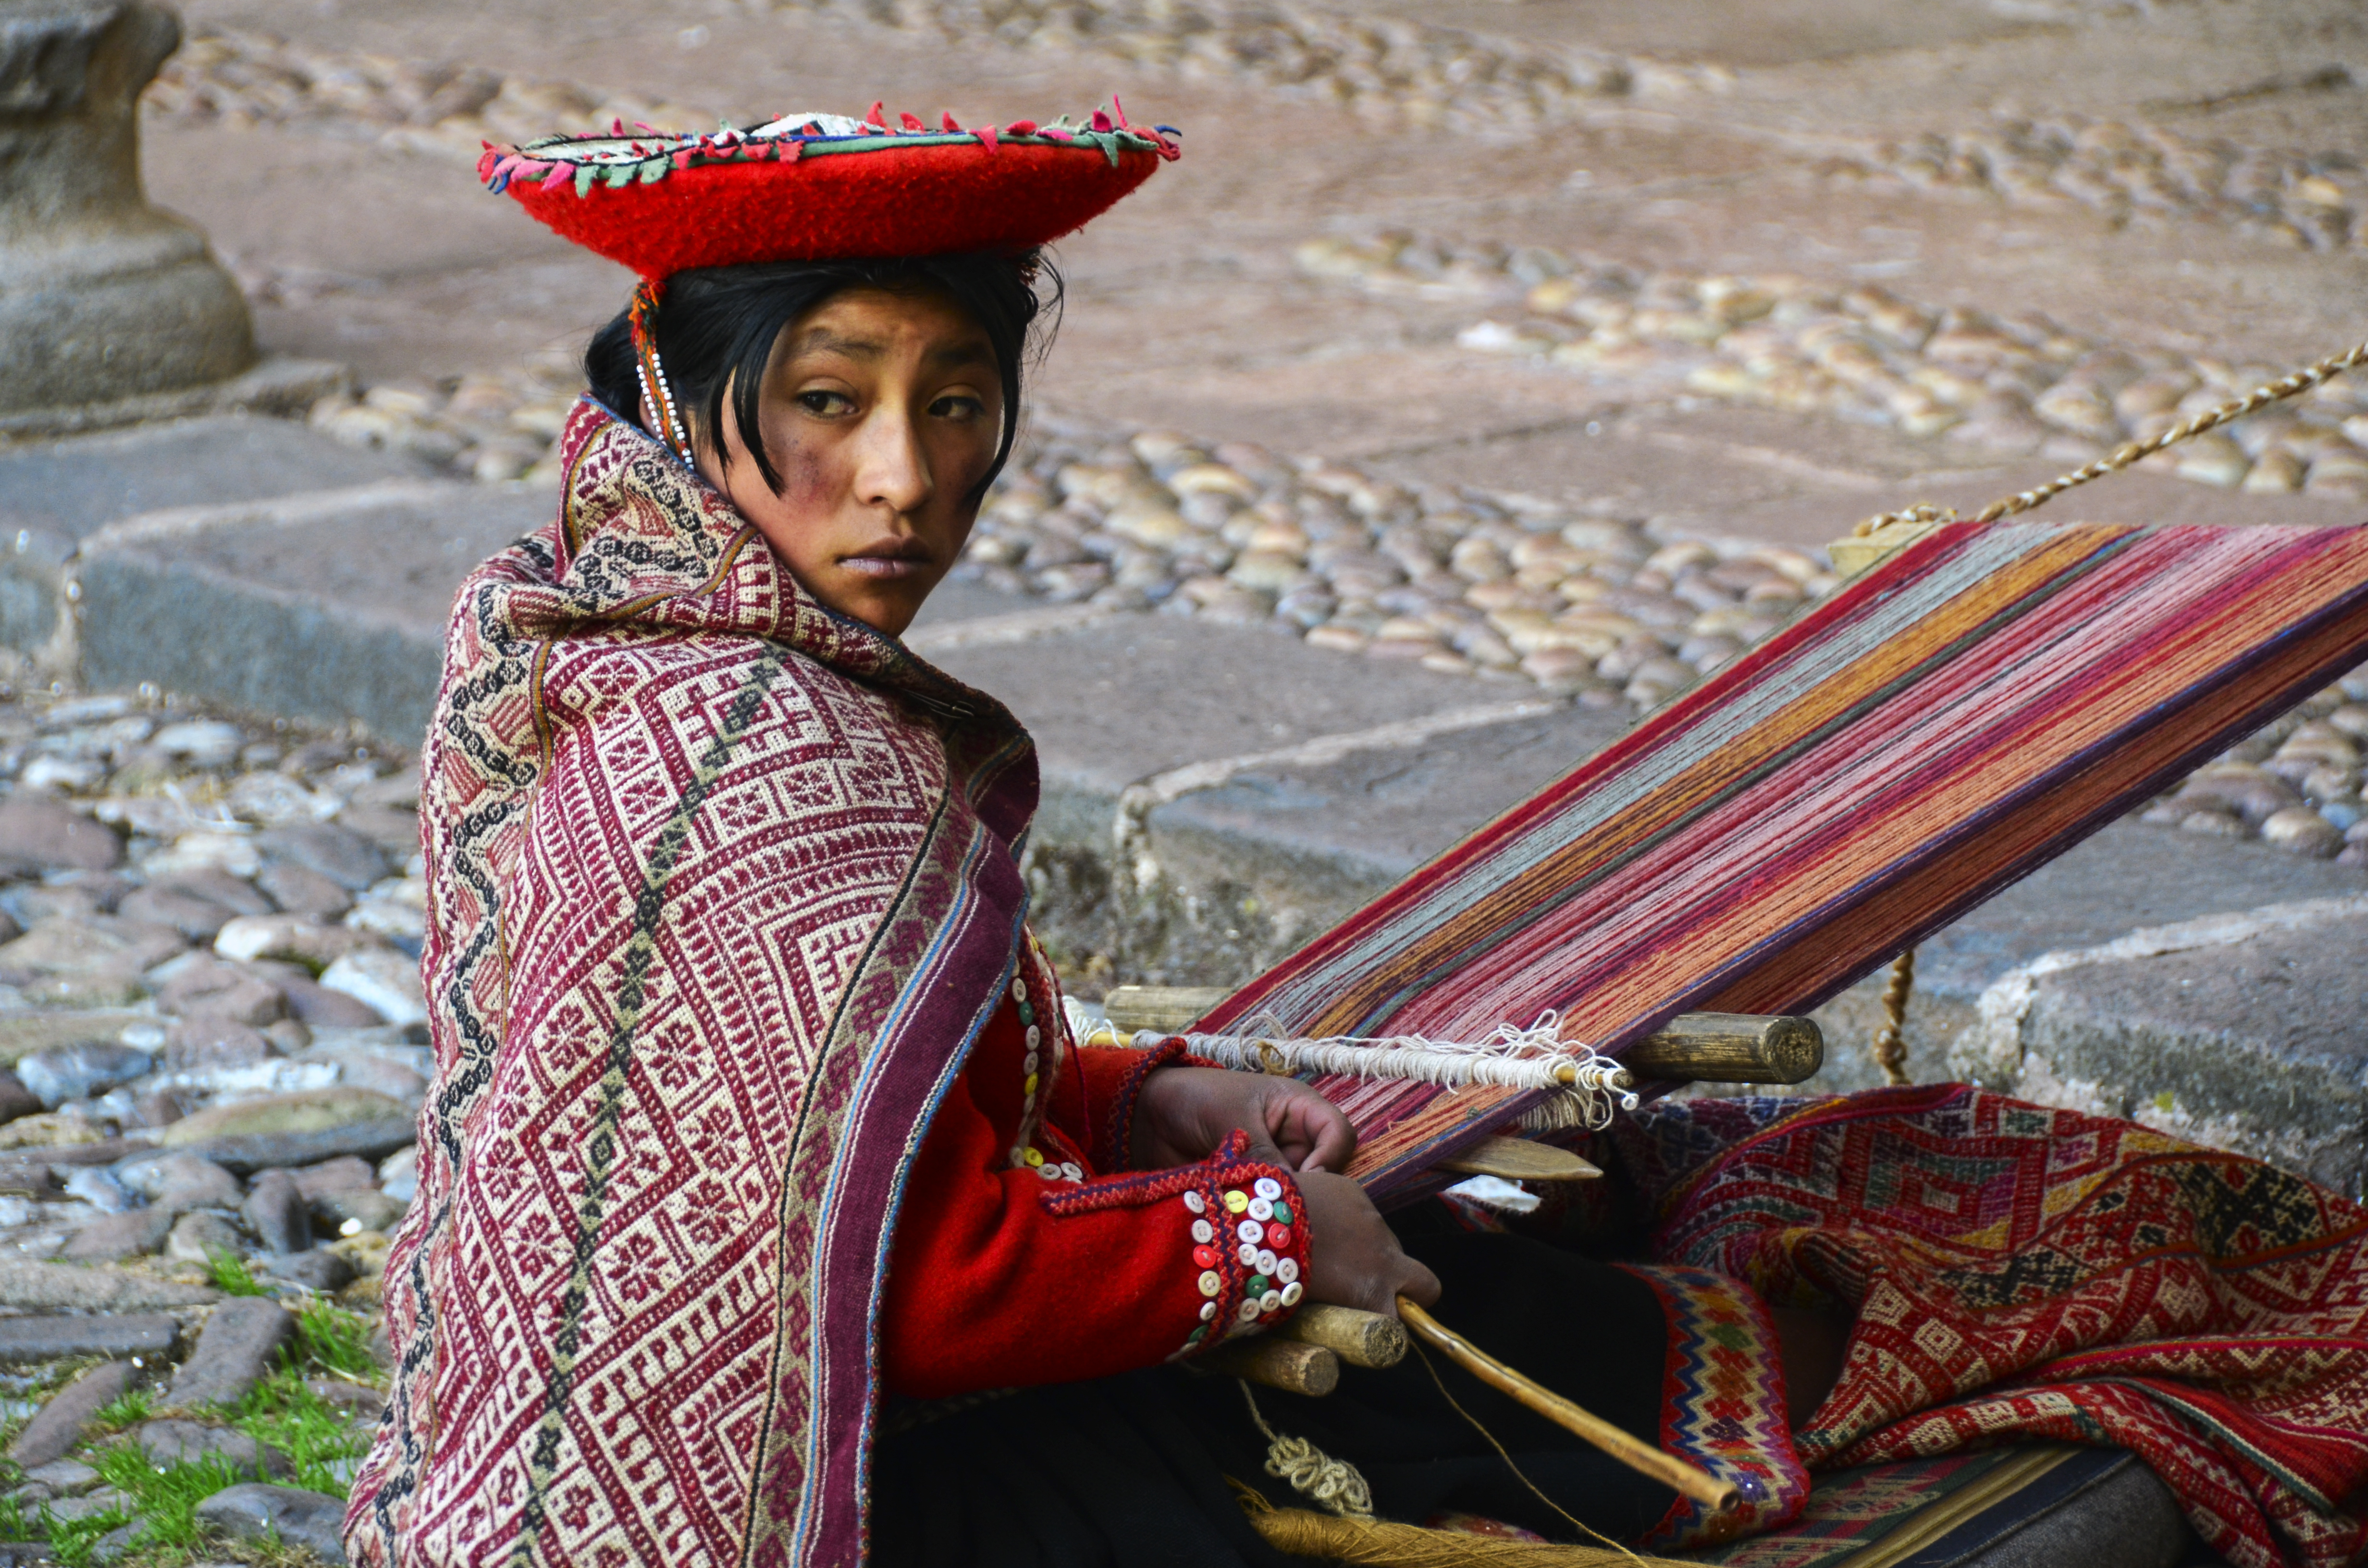 Young artisan weaver in colorful clothing